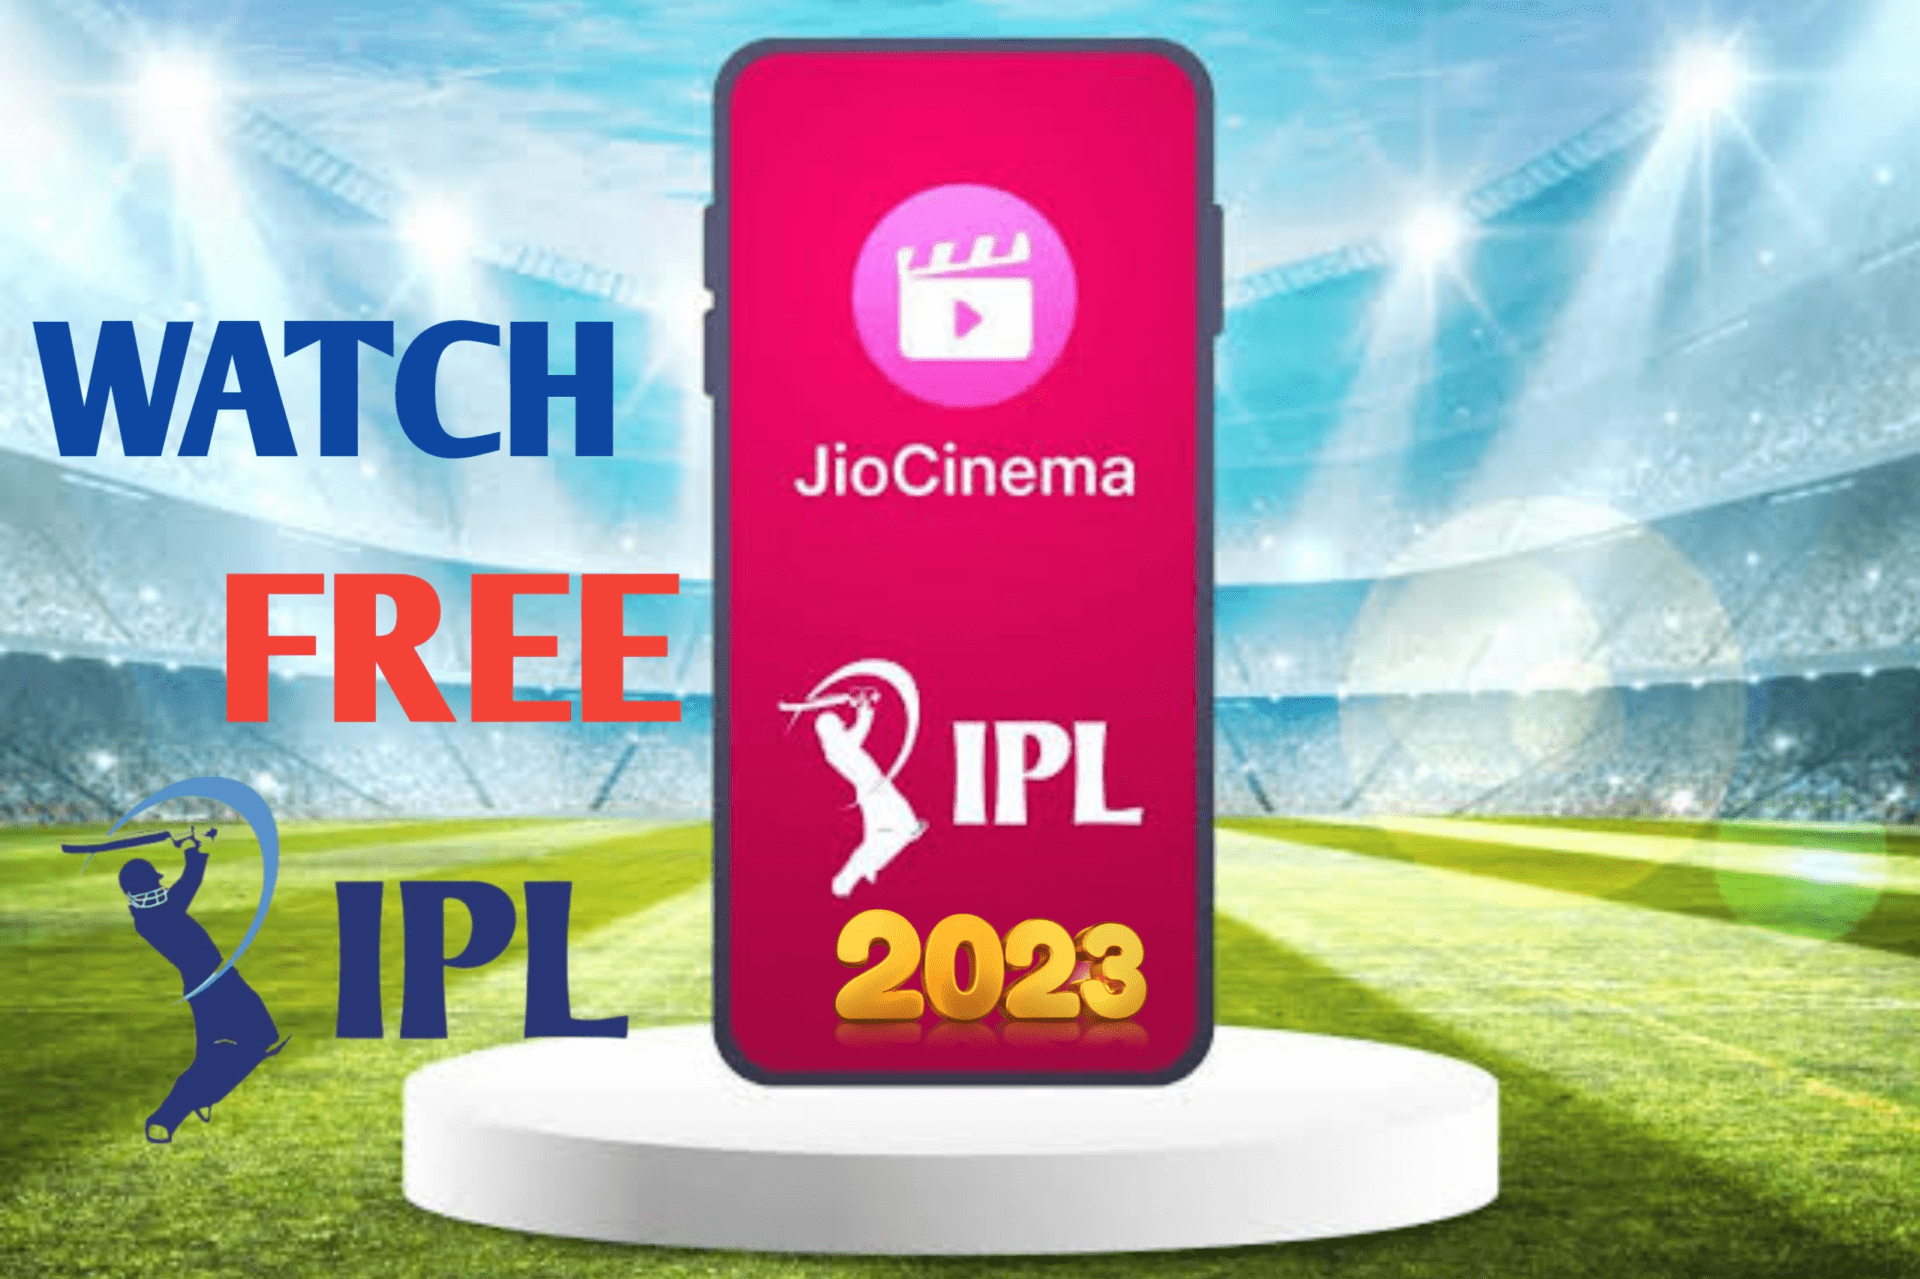 JioCinema to compete with Facebook and Youtube in digital advertising via free IPL streaming